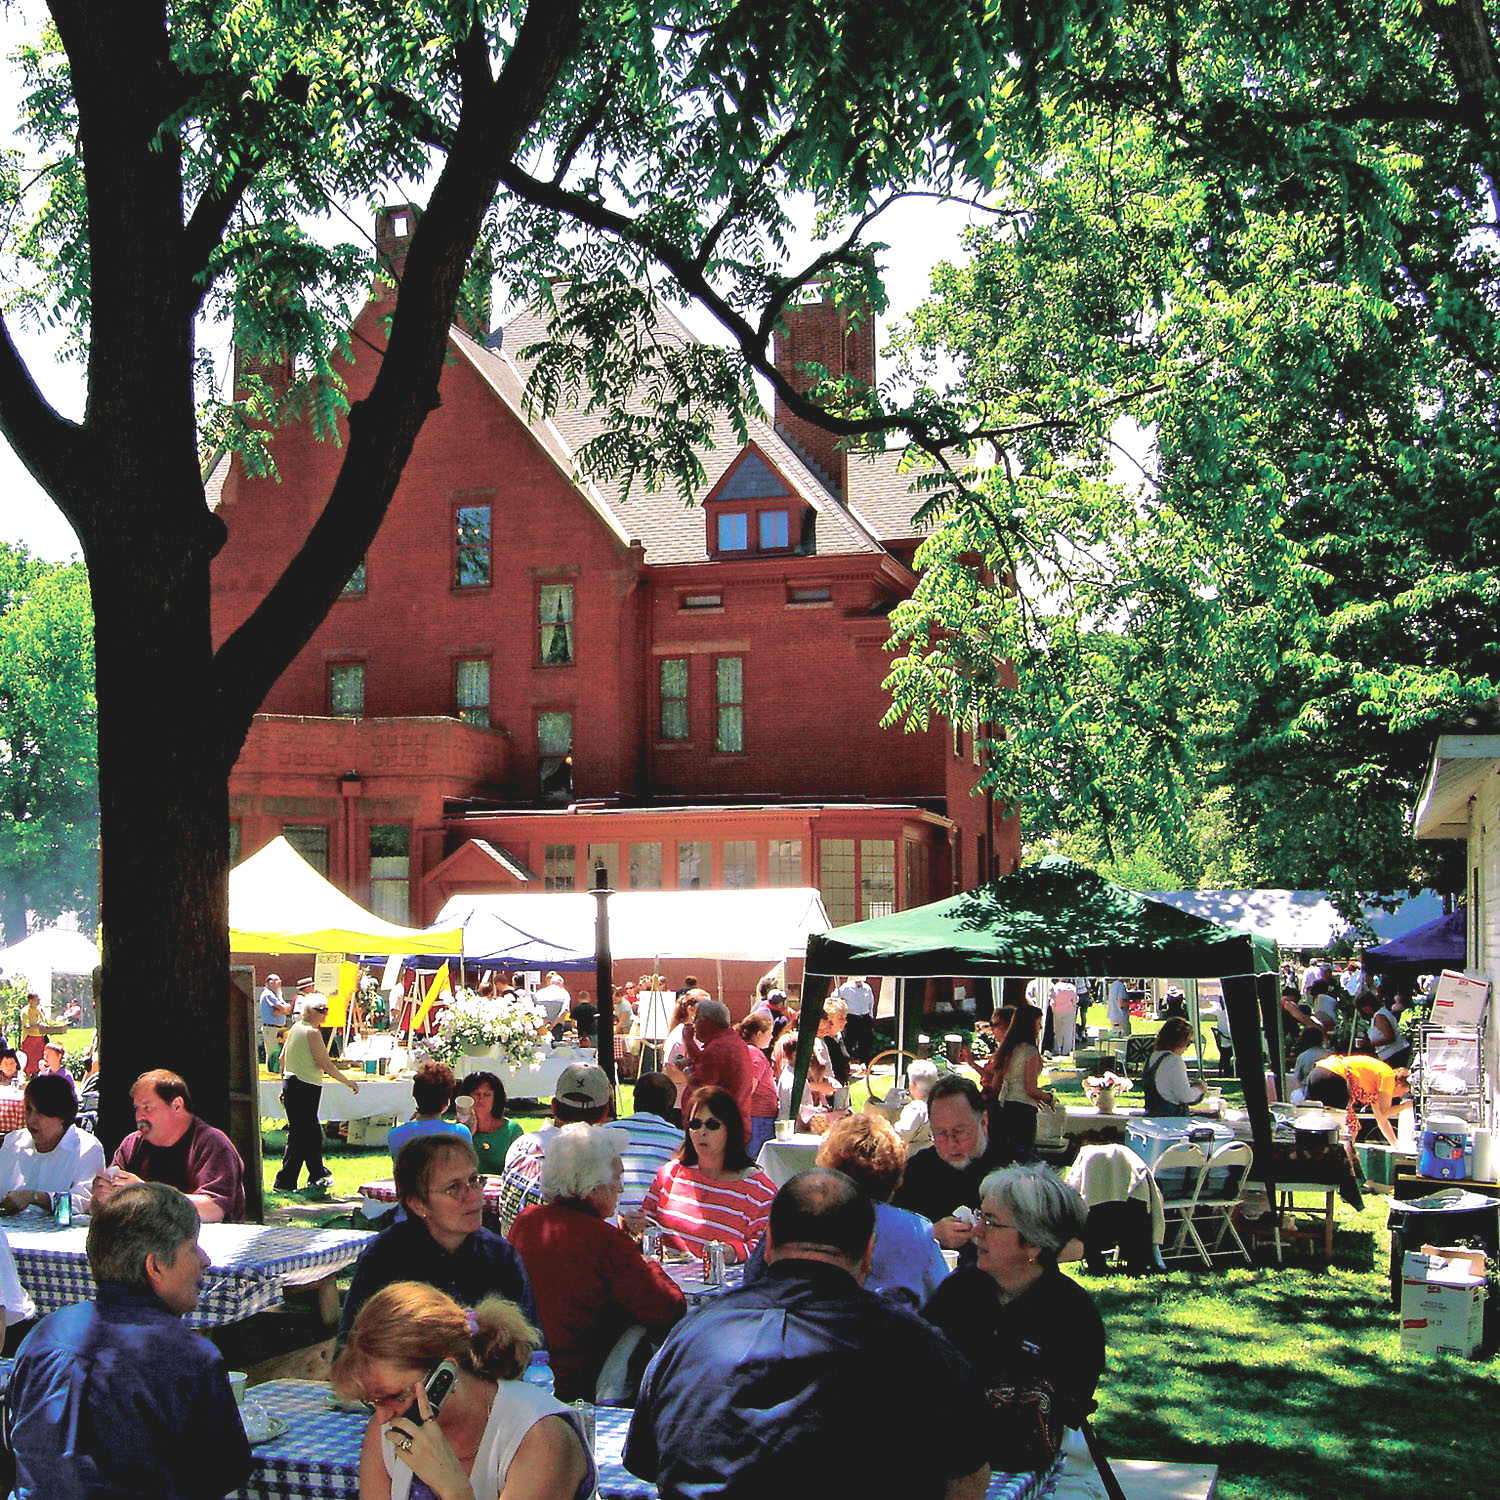 Participants enjoy an outdoor celebration at the Howard Steamboat Museum, one of several in Jeffersonville, Indiana. The mansion was built in 1890 by a shipyard magnate and is listed on the National Register of Historic Places.